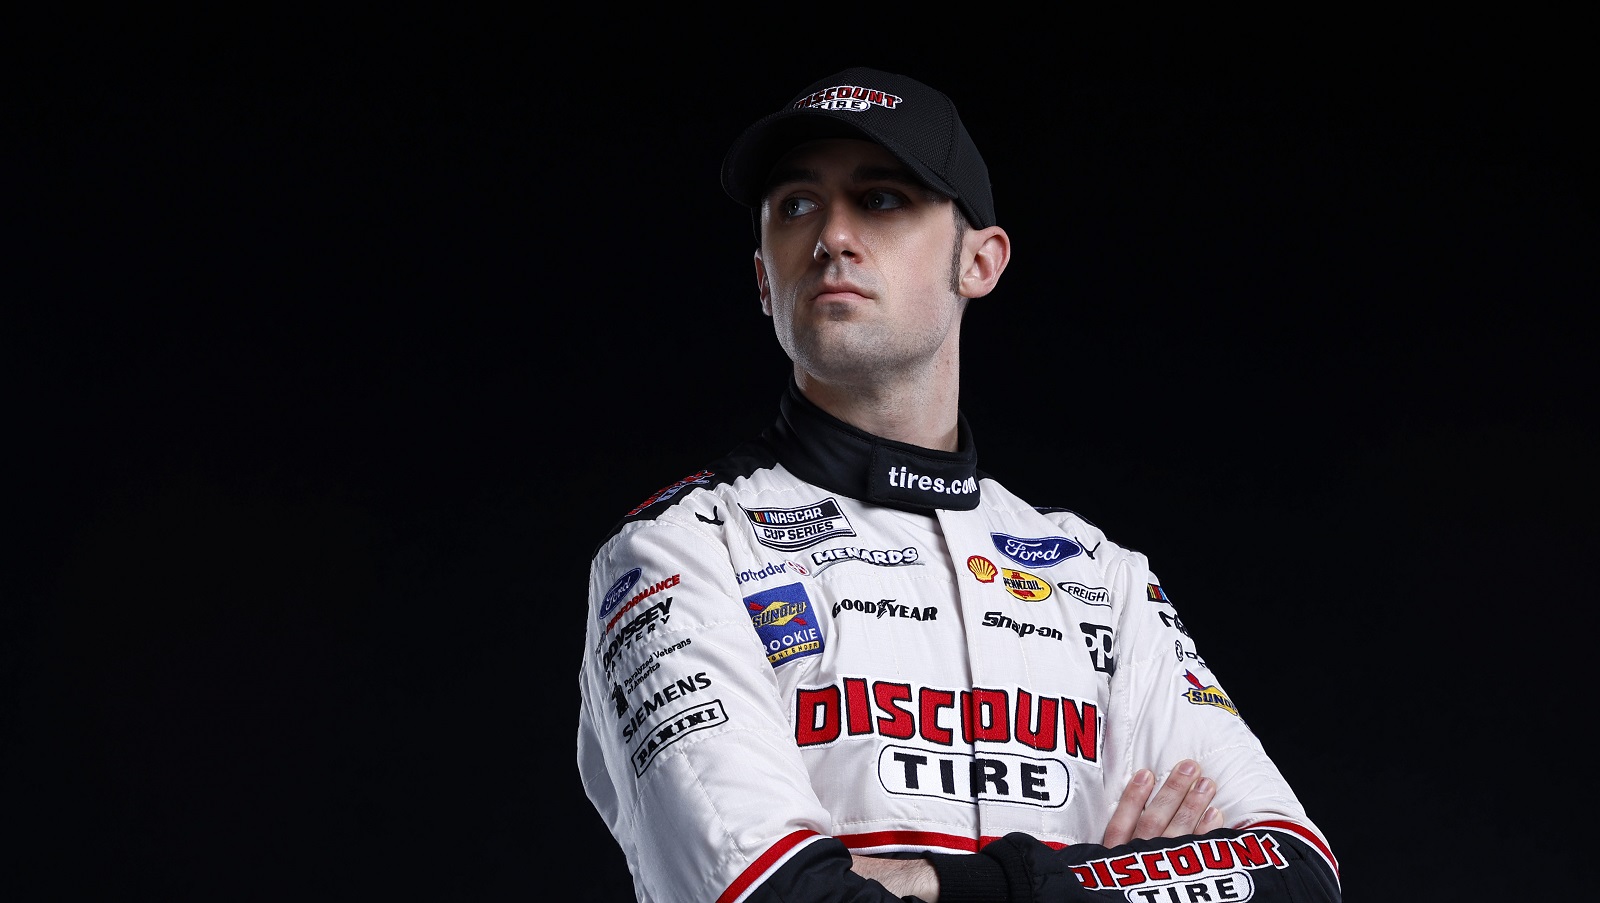 Team Penske driver Austin Cindric poses for a photo during NASCAR Production Days at Clutch Studios on Jan. 19, 2022, in Concord, North Carolina. | Jared C. Tilton/Getty Images